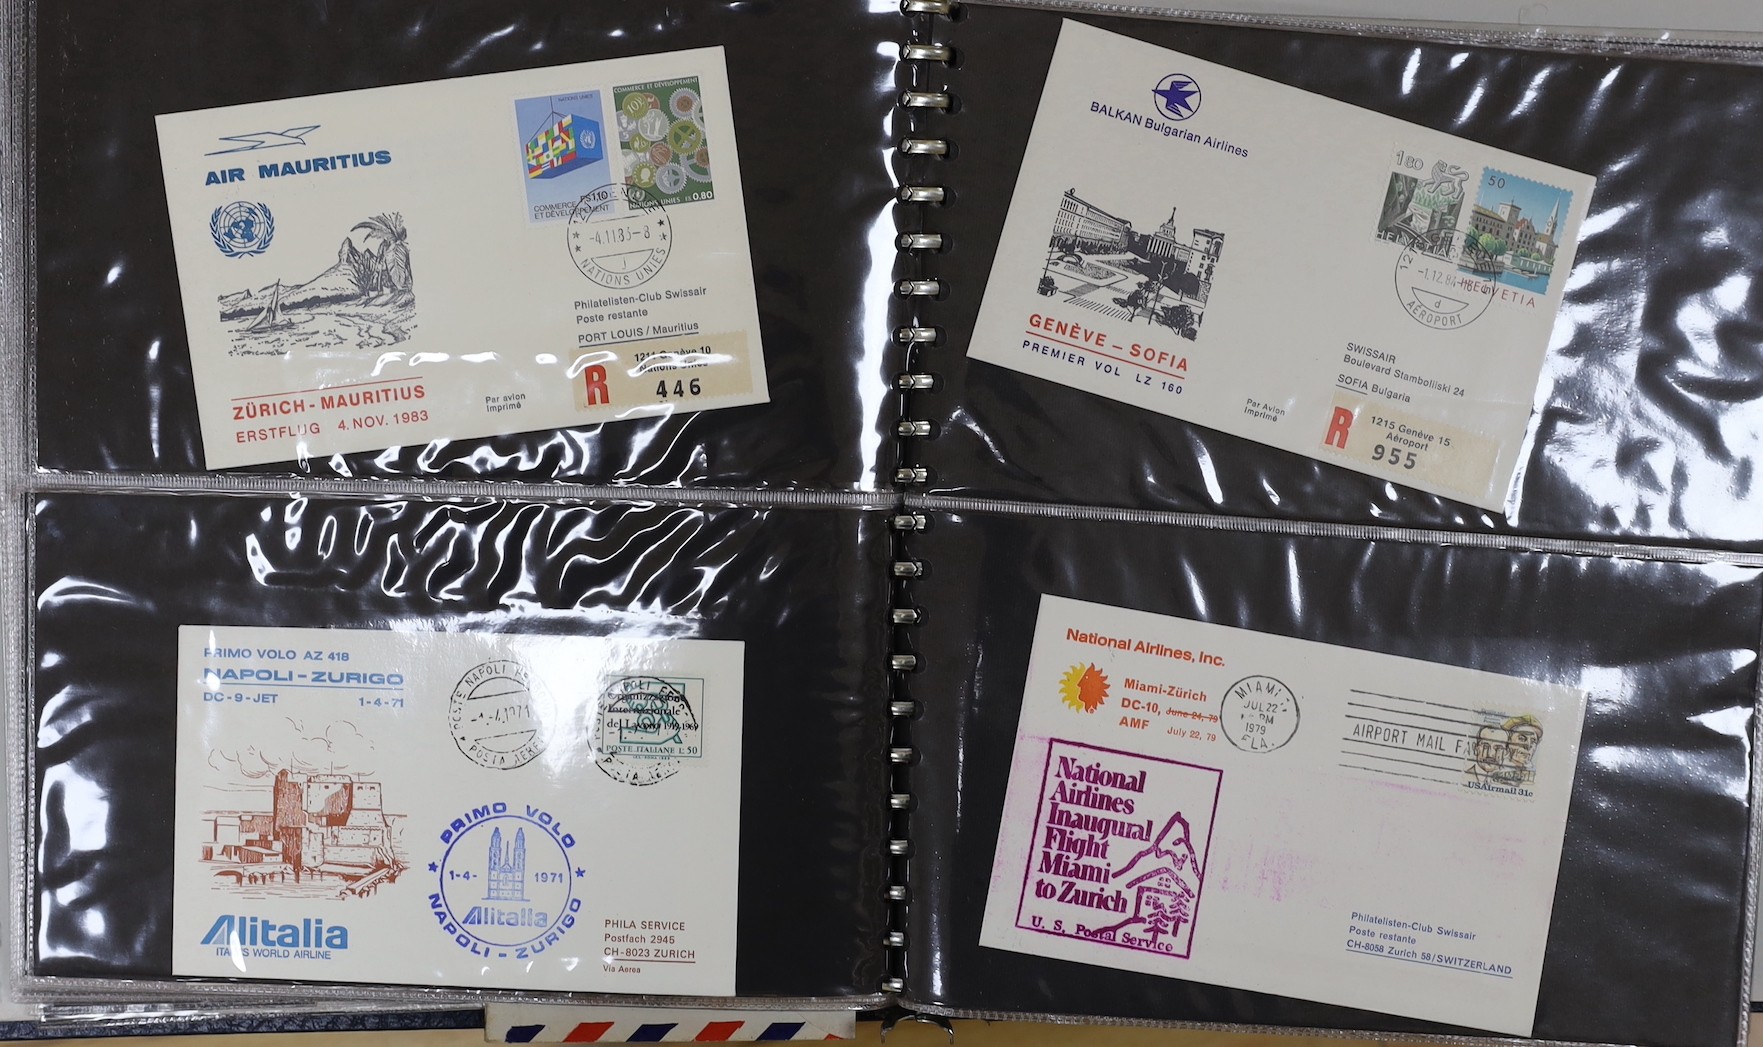 Ten albums World stamps and FDCs, modern airmail covers